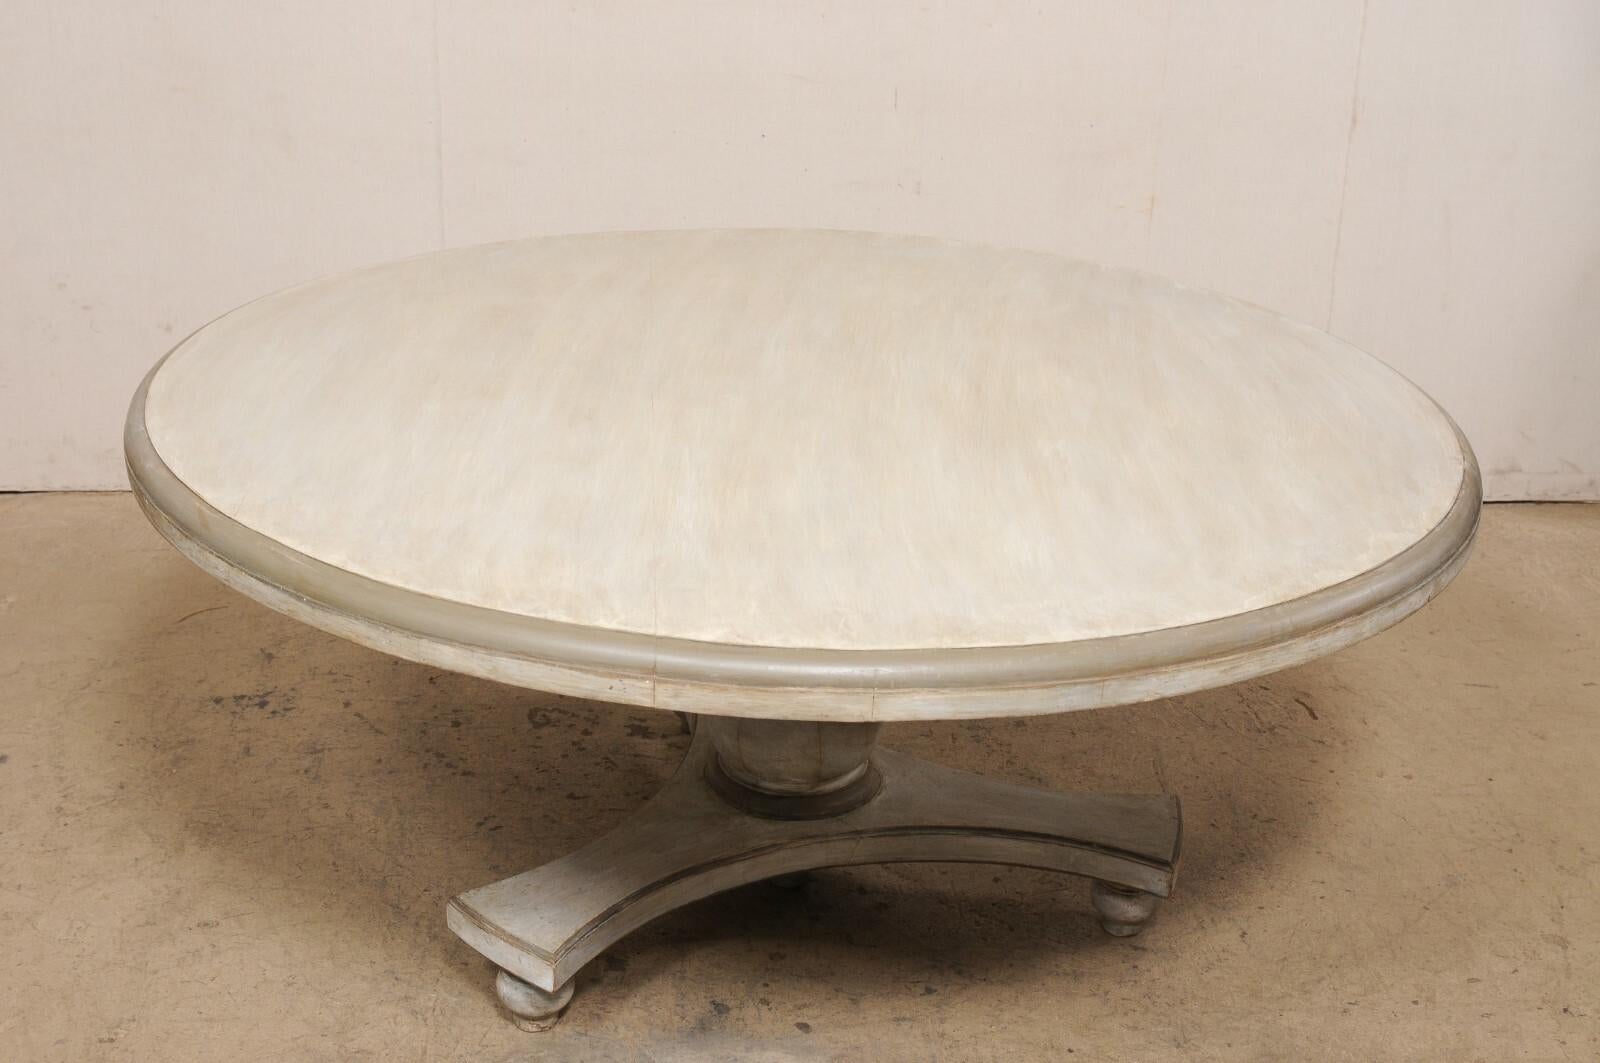 Painted Teak Round-Shaped Pedestal Dining Table, 5.5 Ft Diameter In Good Condition For Sale In Atlanta, GA